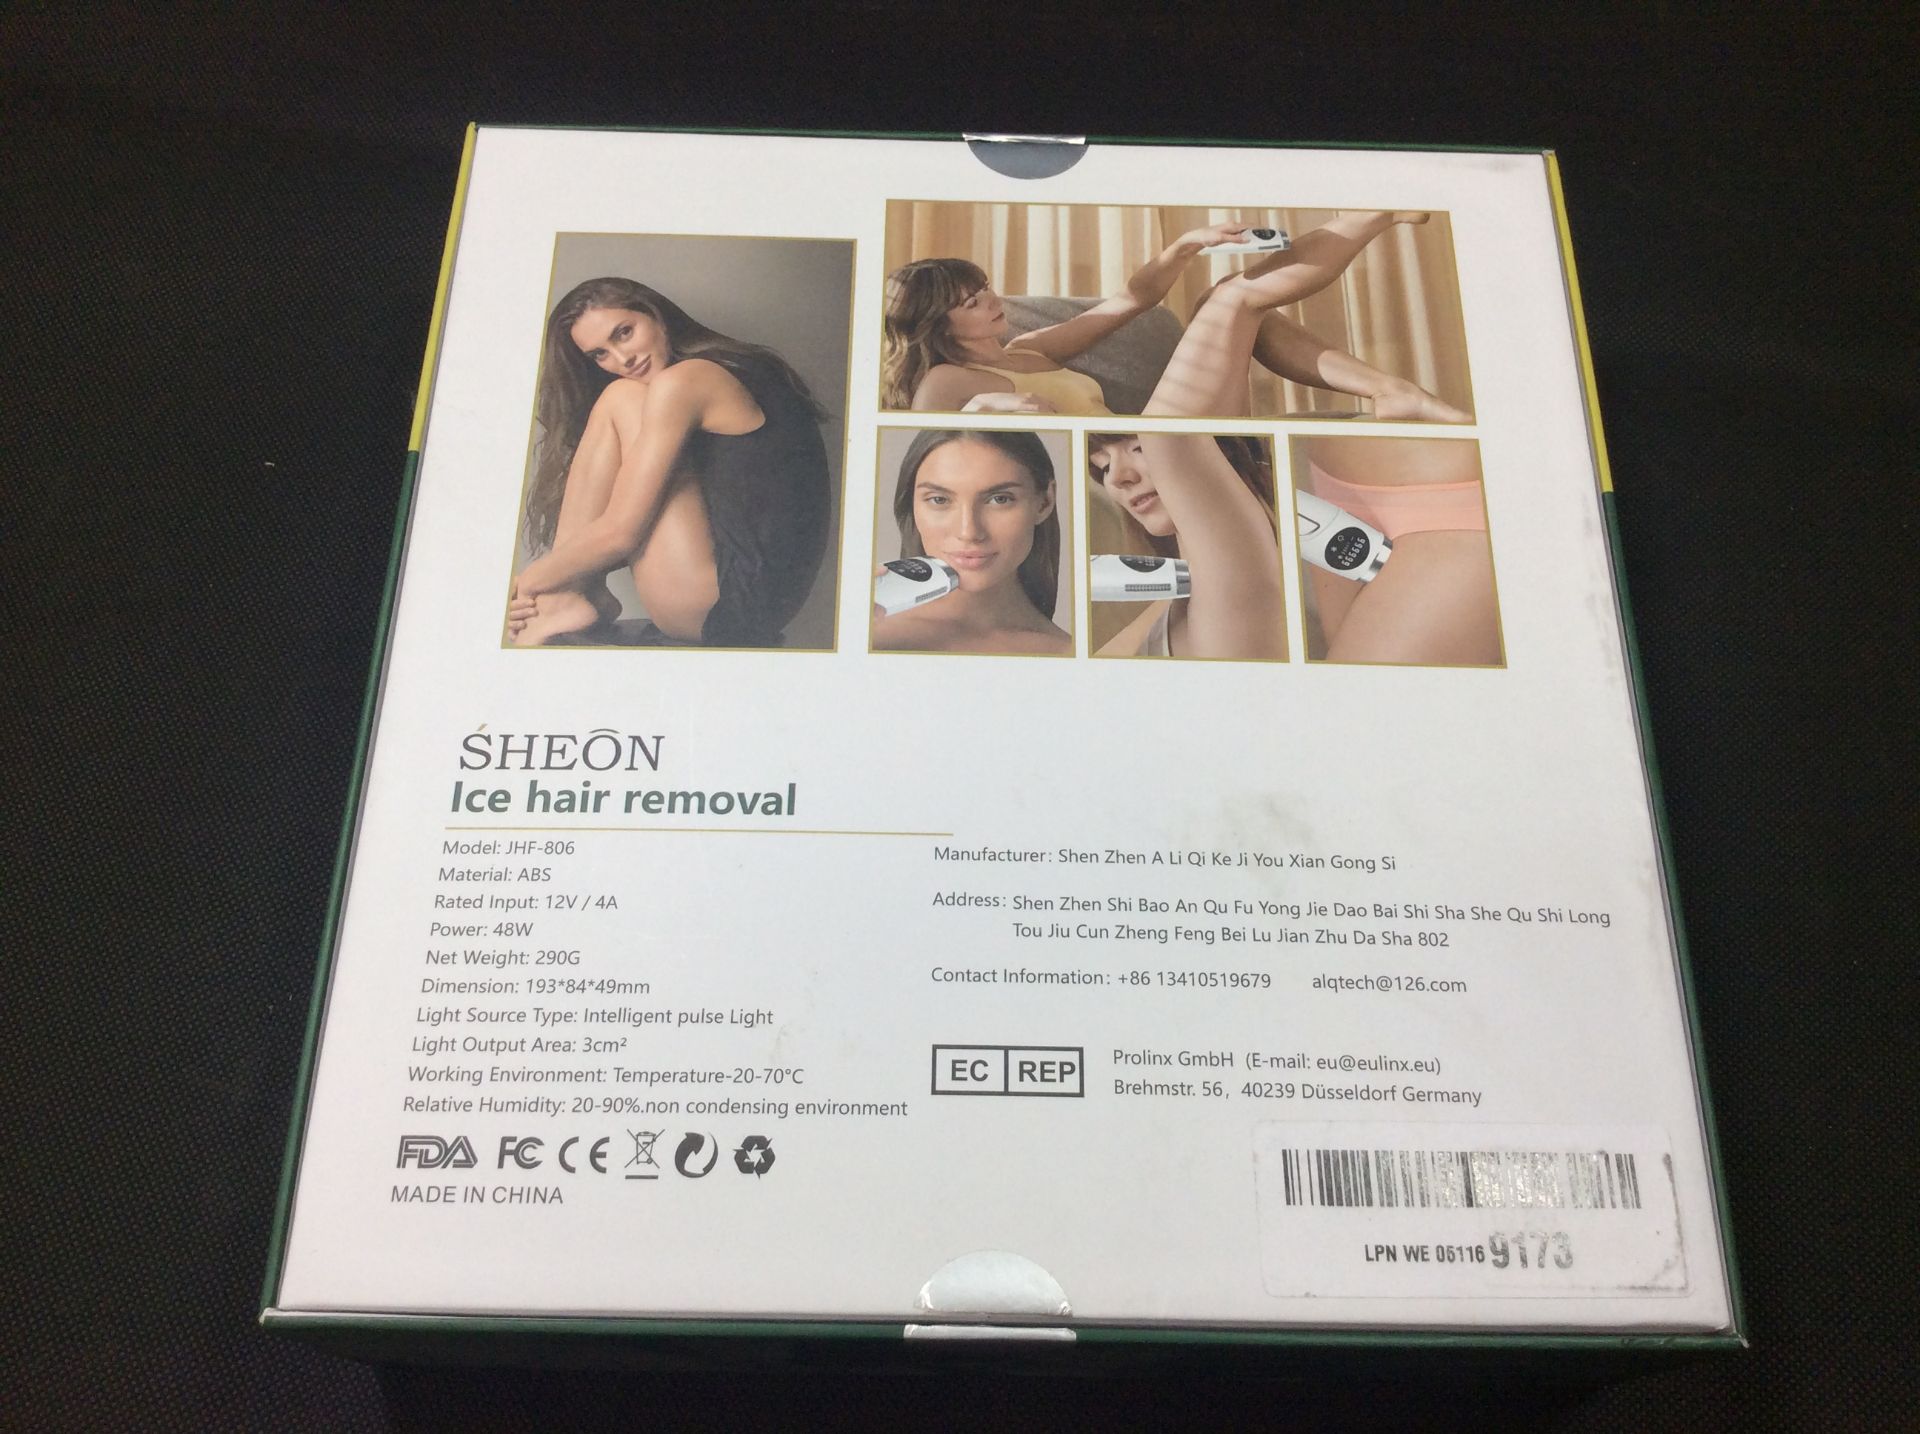 Sheon ice hair removal - Image 2 of 2